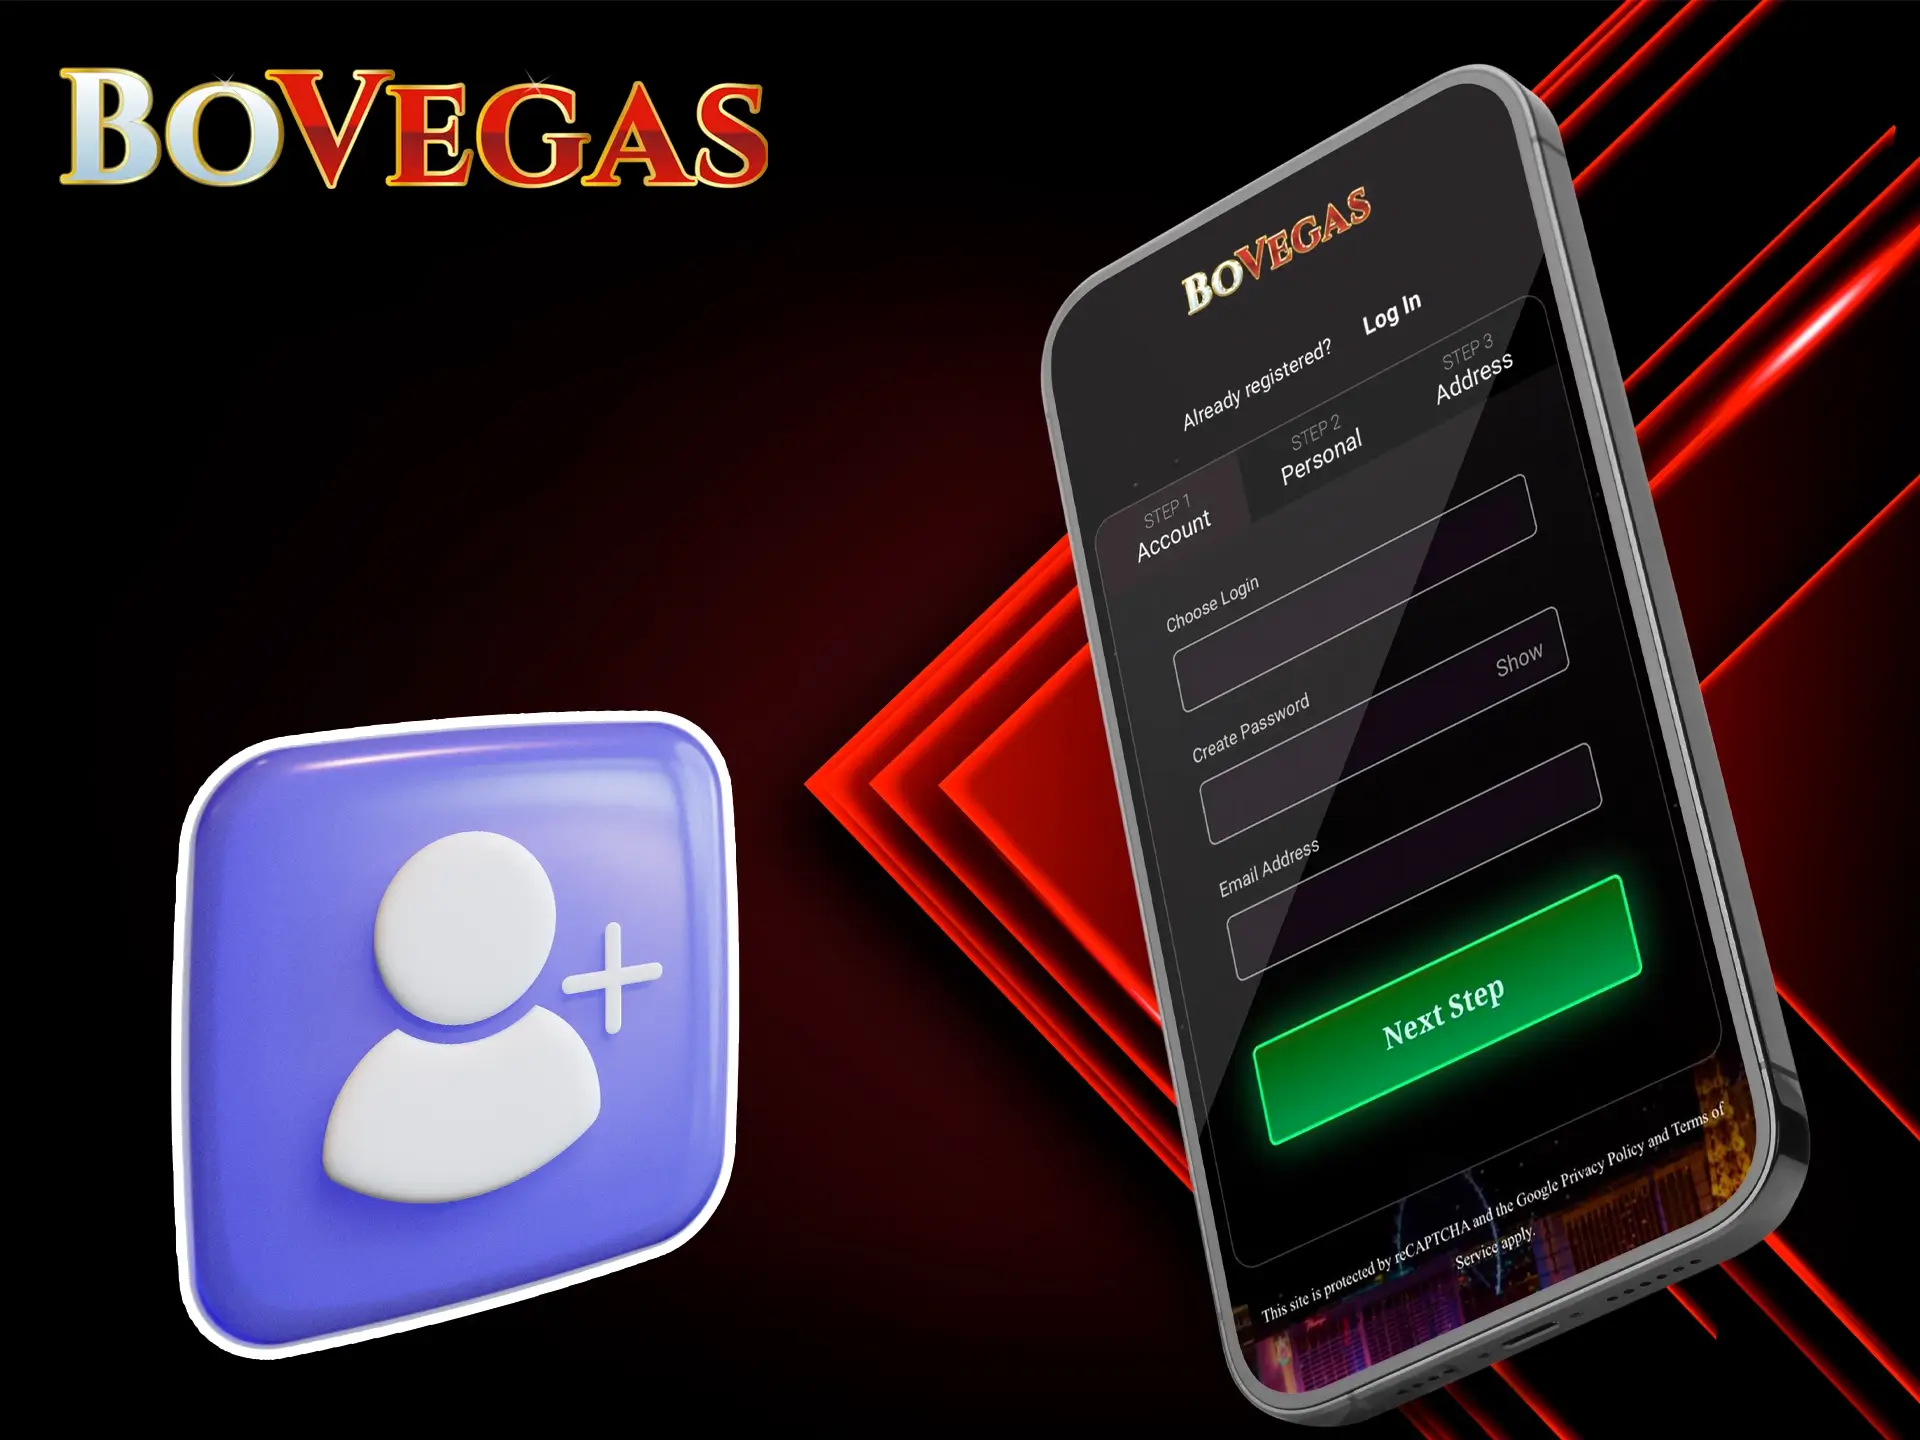 You can sign up at BoVegas Casino anywhere, all you need is a mobile phone.